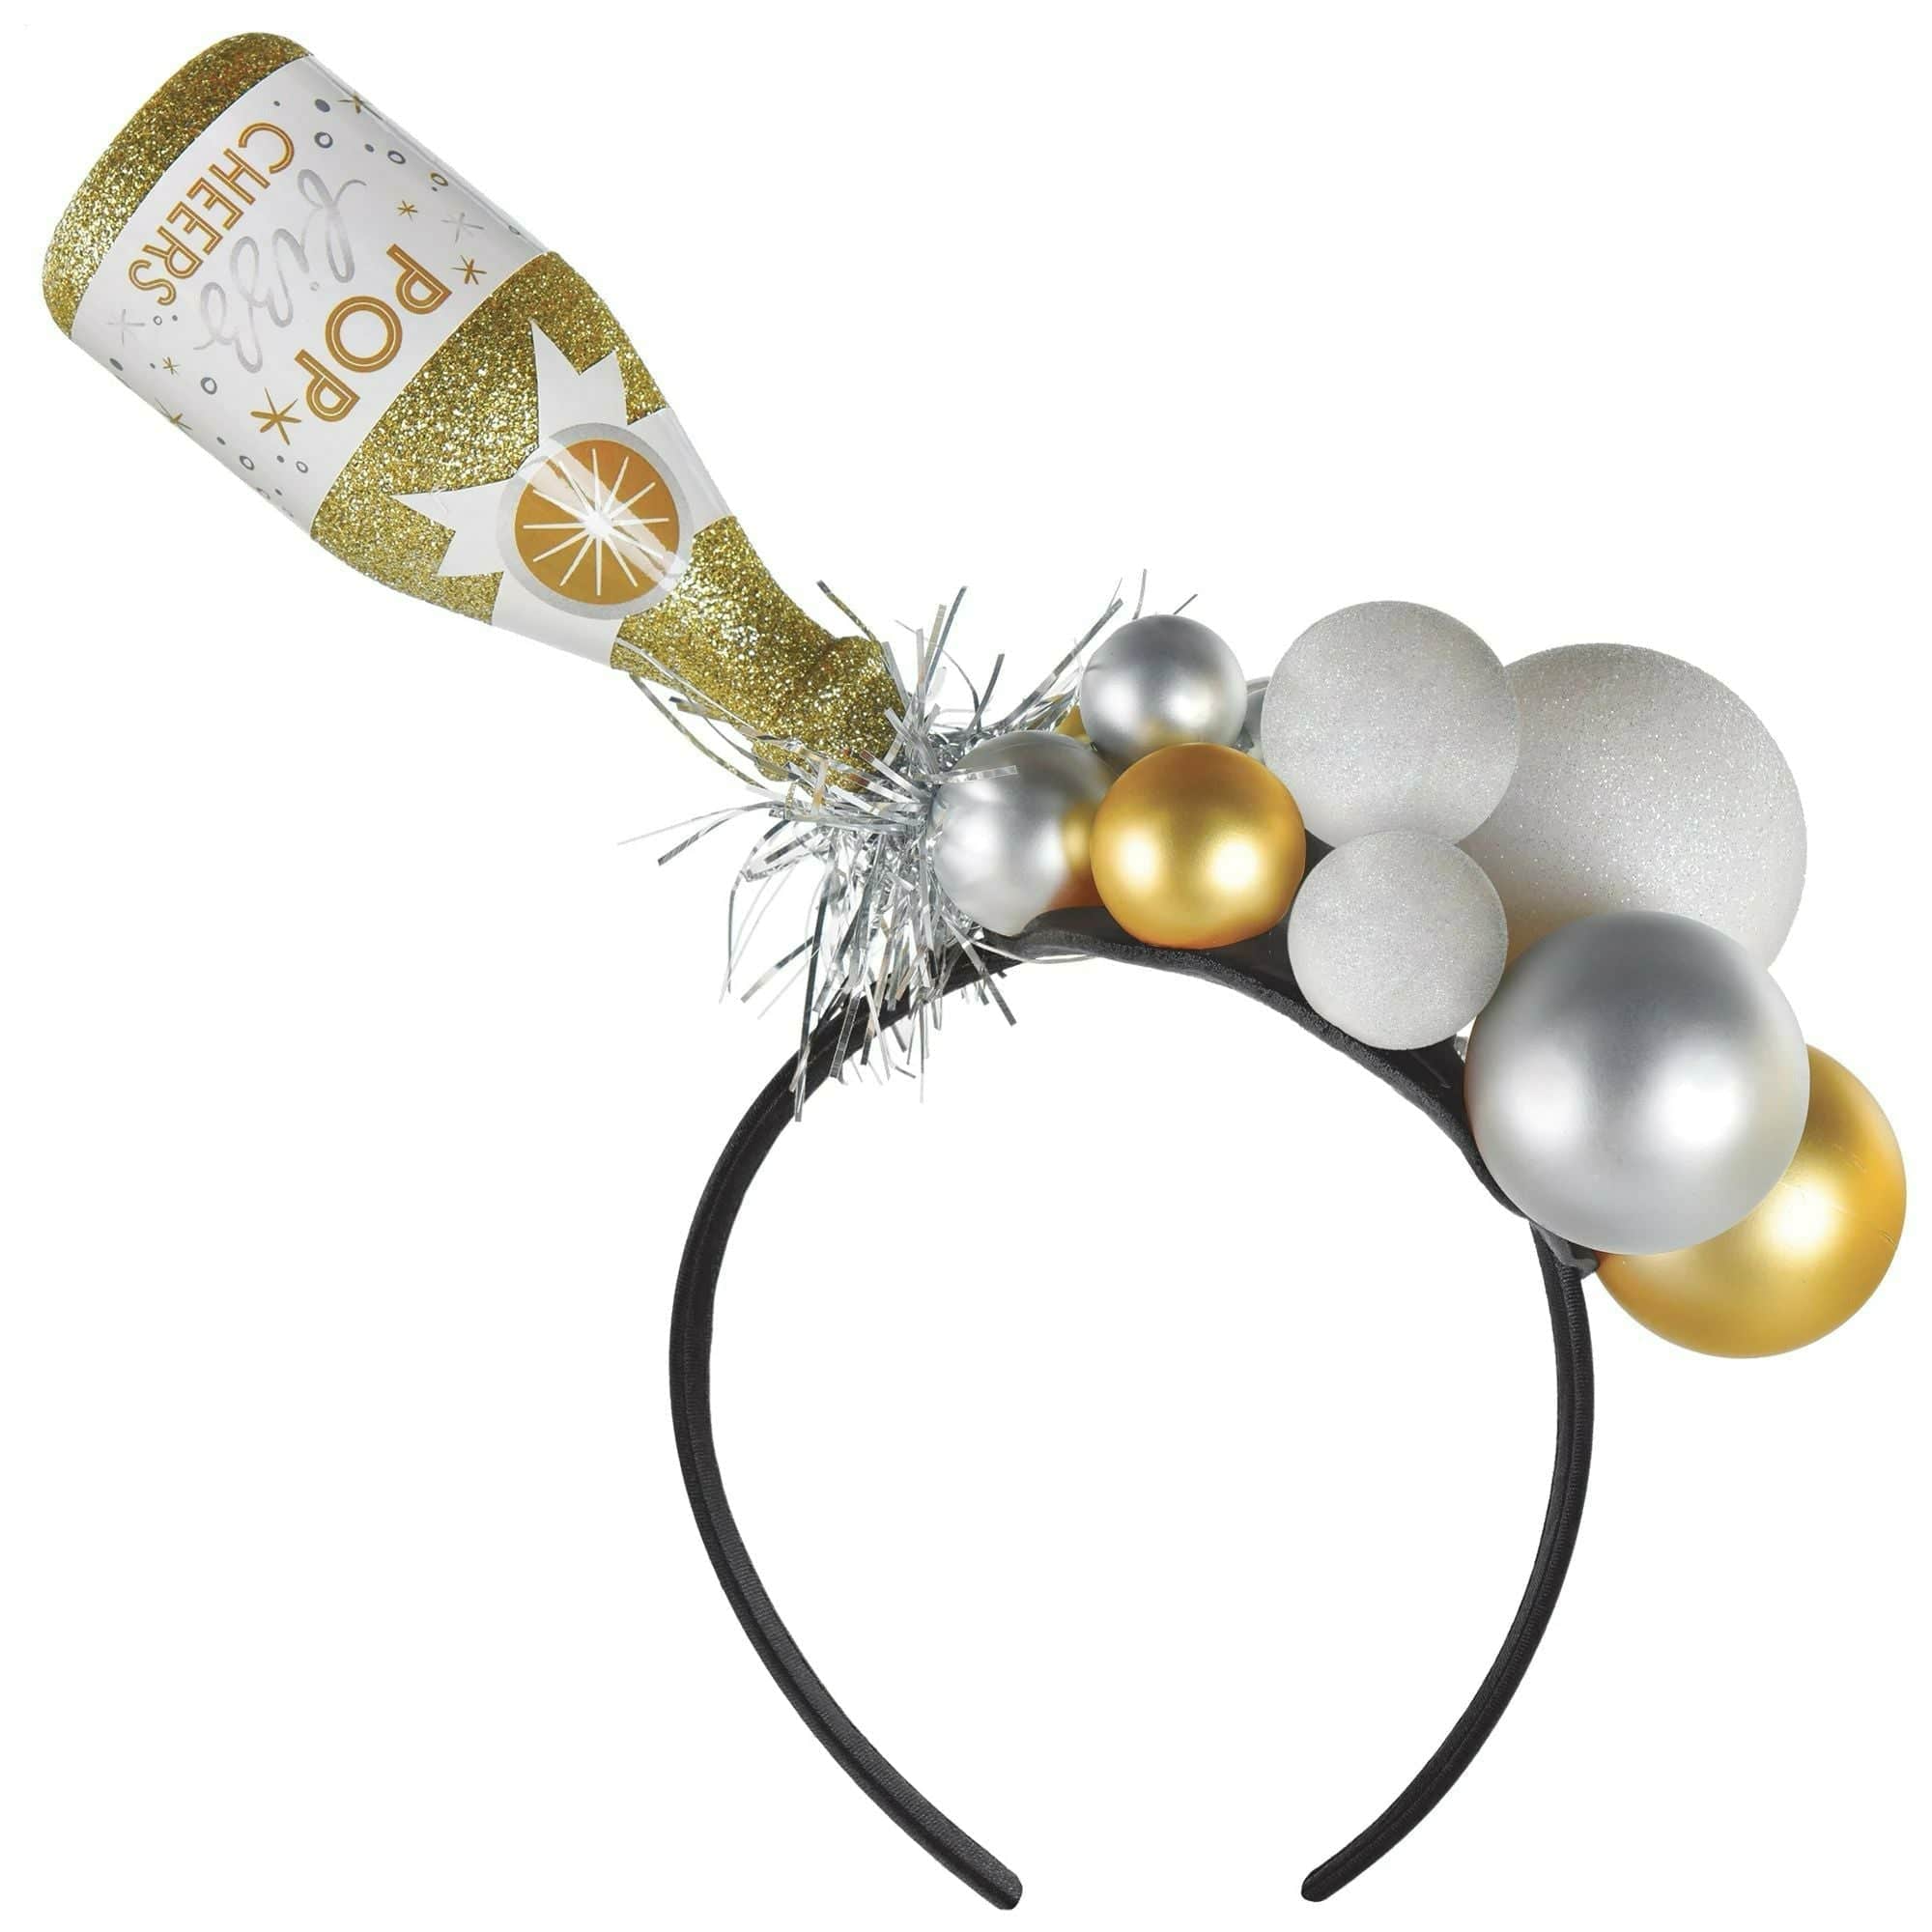 Amscan HOLIDAY: NEW YEAR'S Champagne Bottle and Bubbles Headband